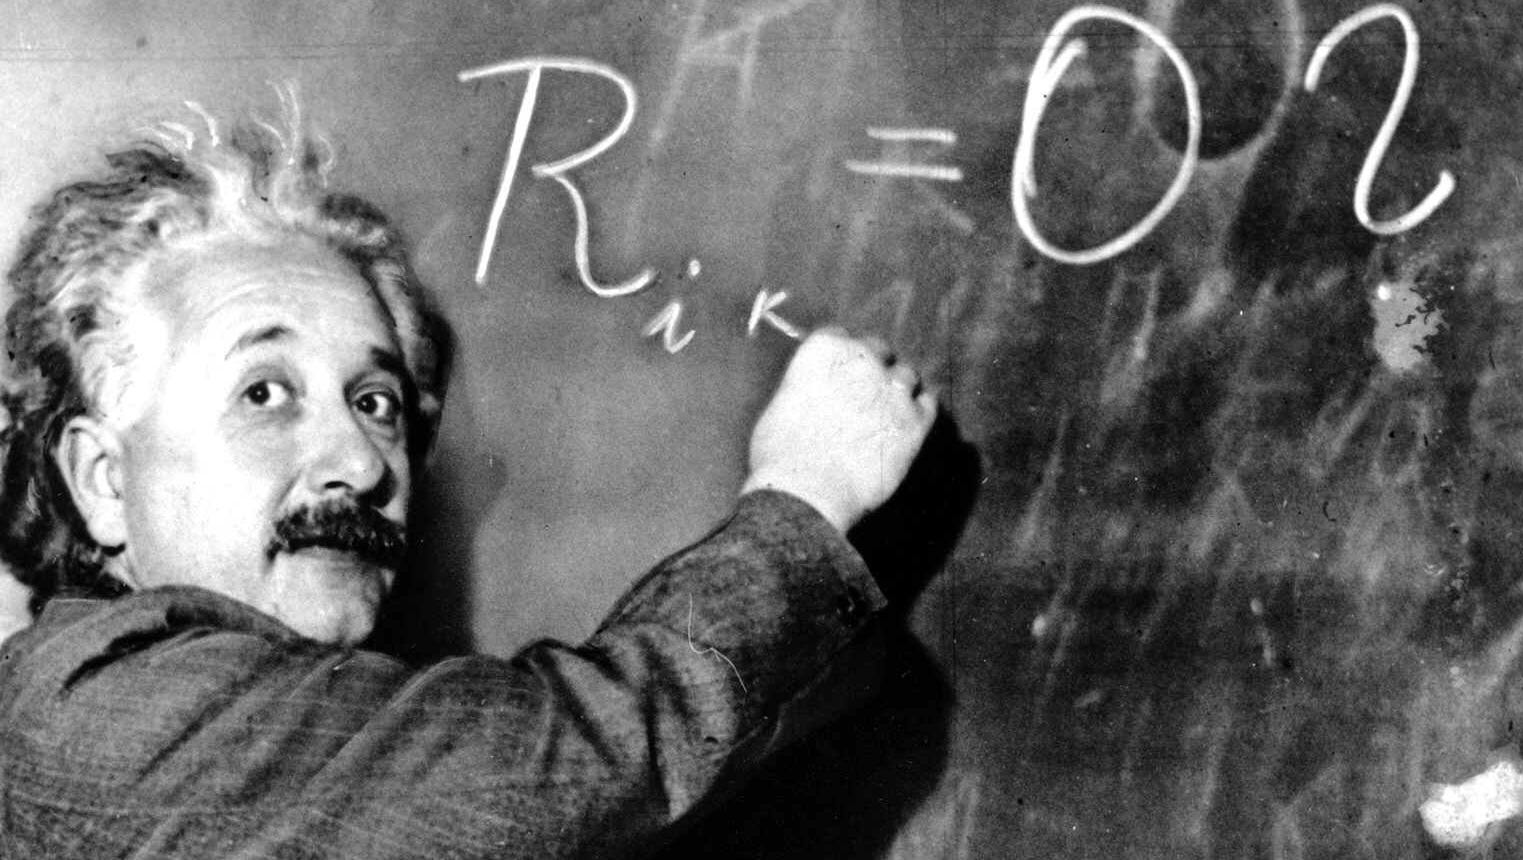 Fact check: Einstein never said this quote about fish climbing trees